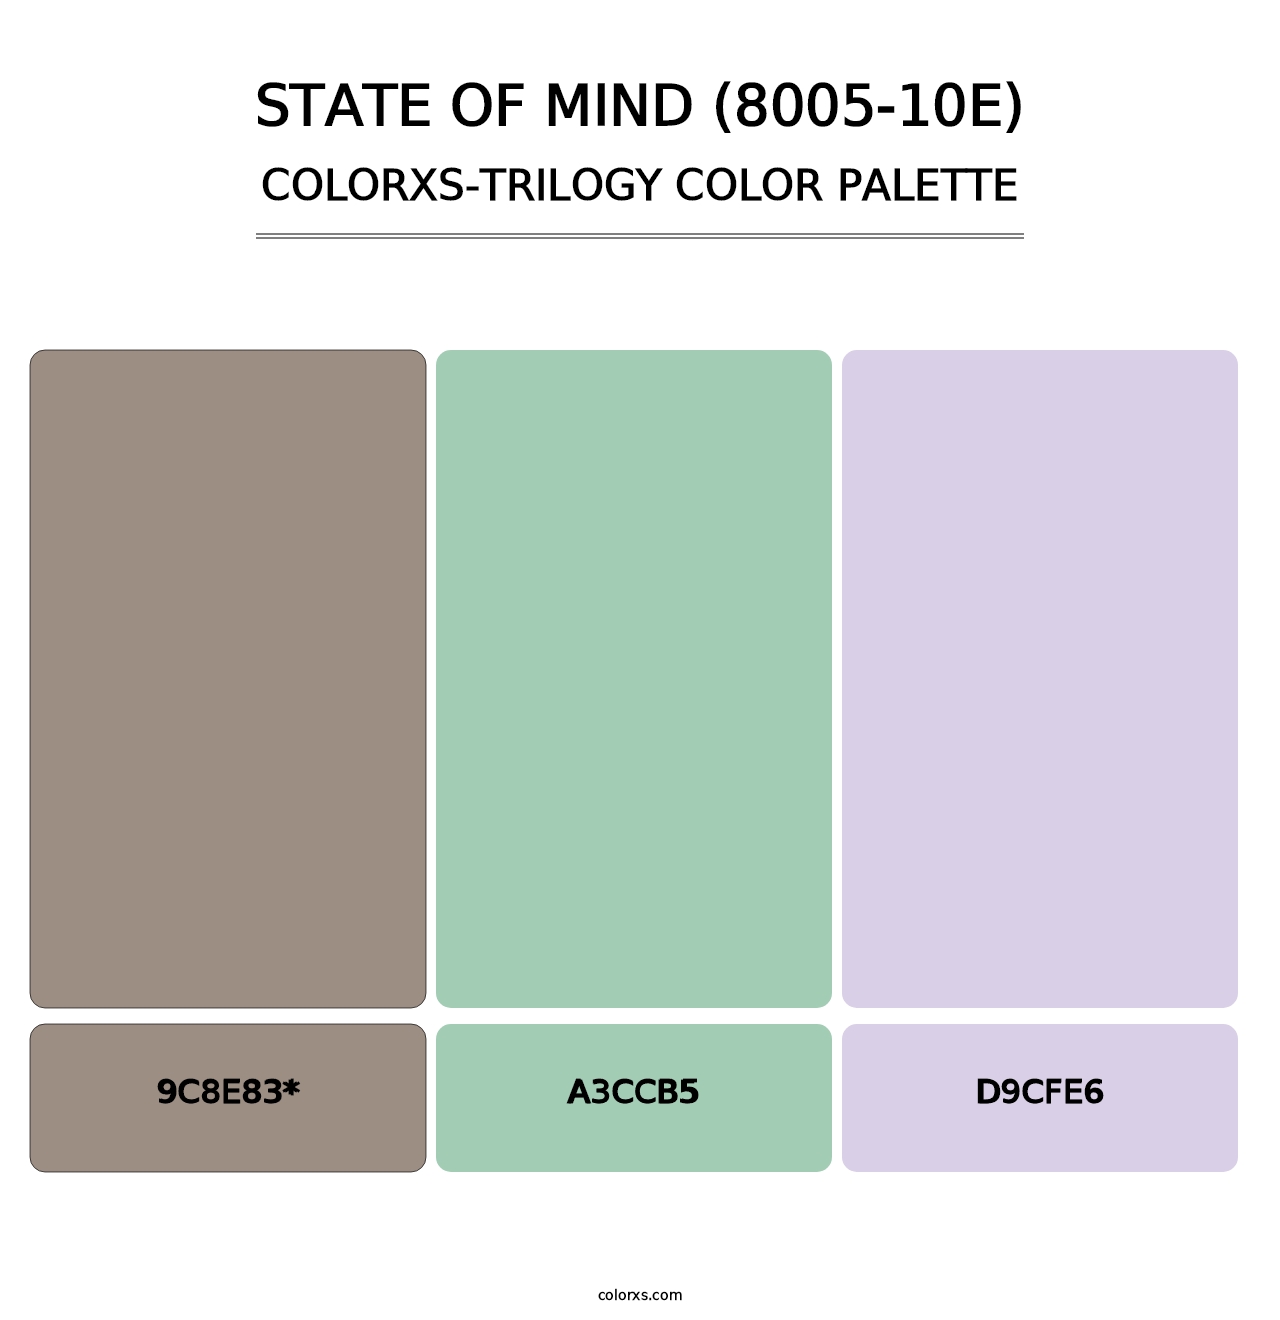 State of Mind (8005-10E) - Colorxs Trilogy Palette